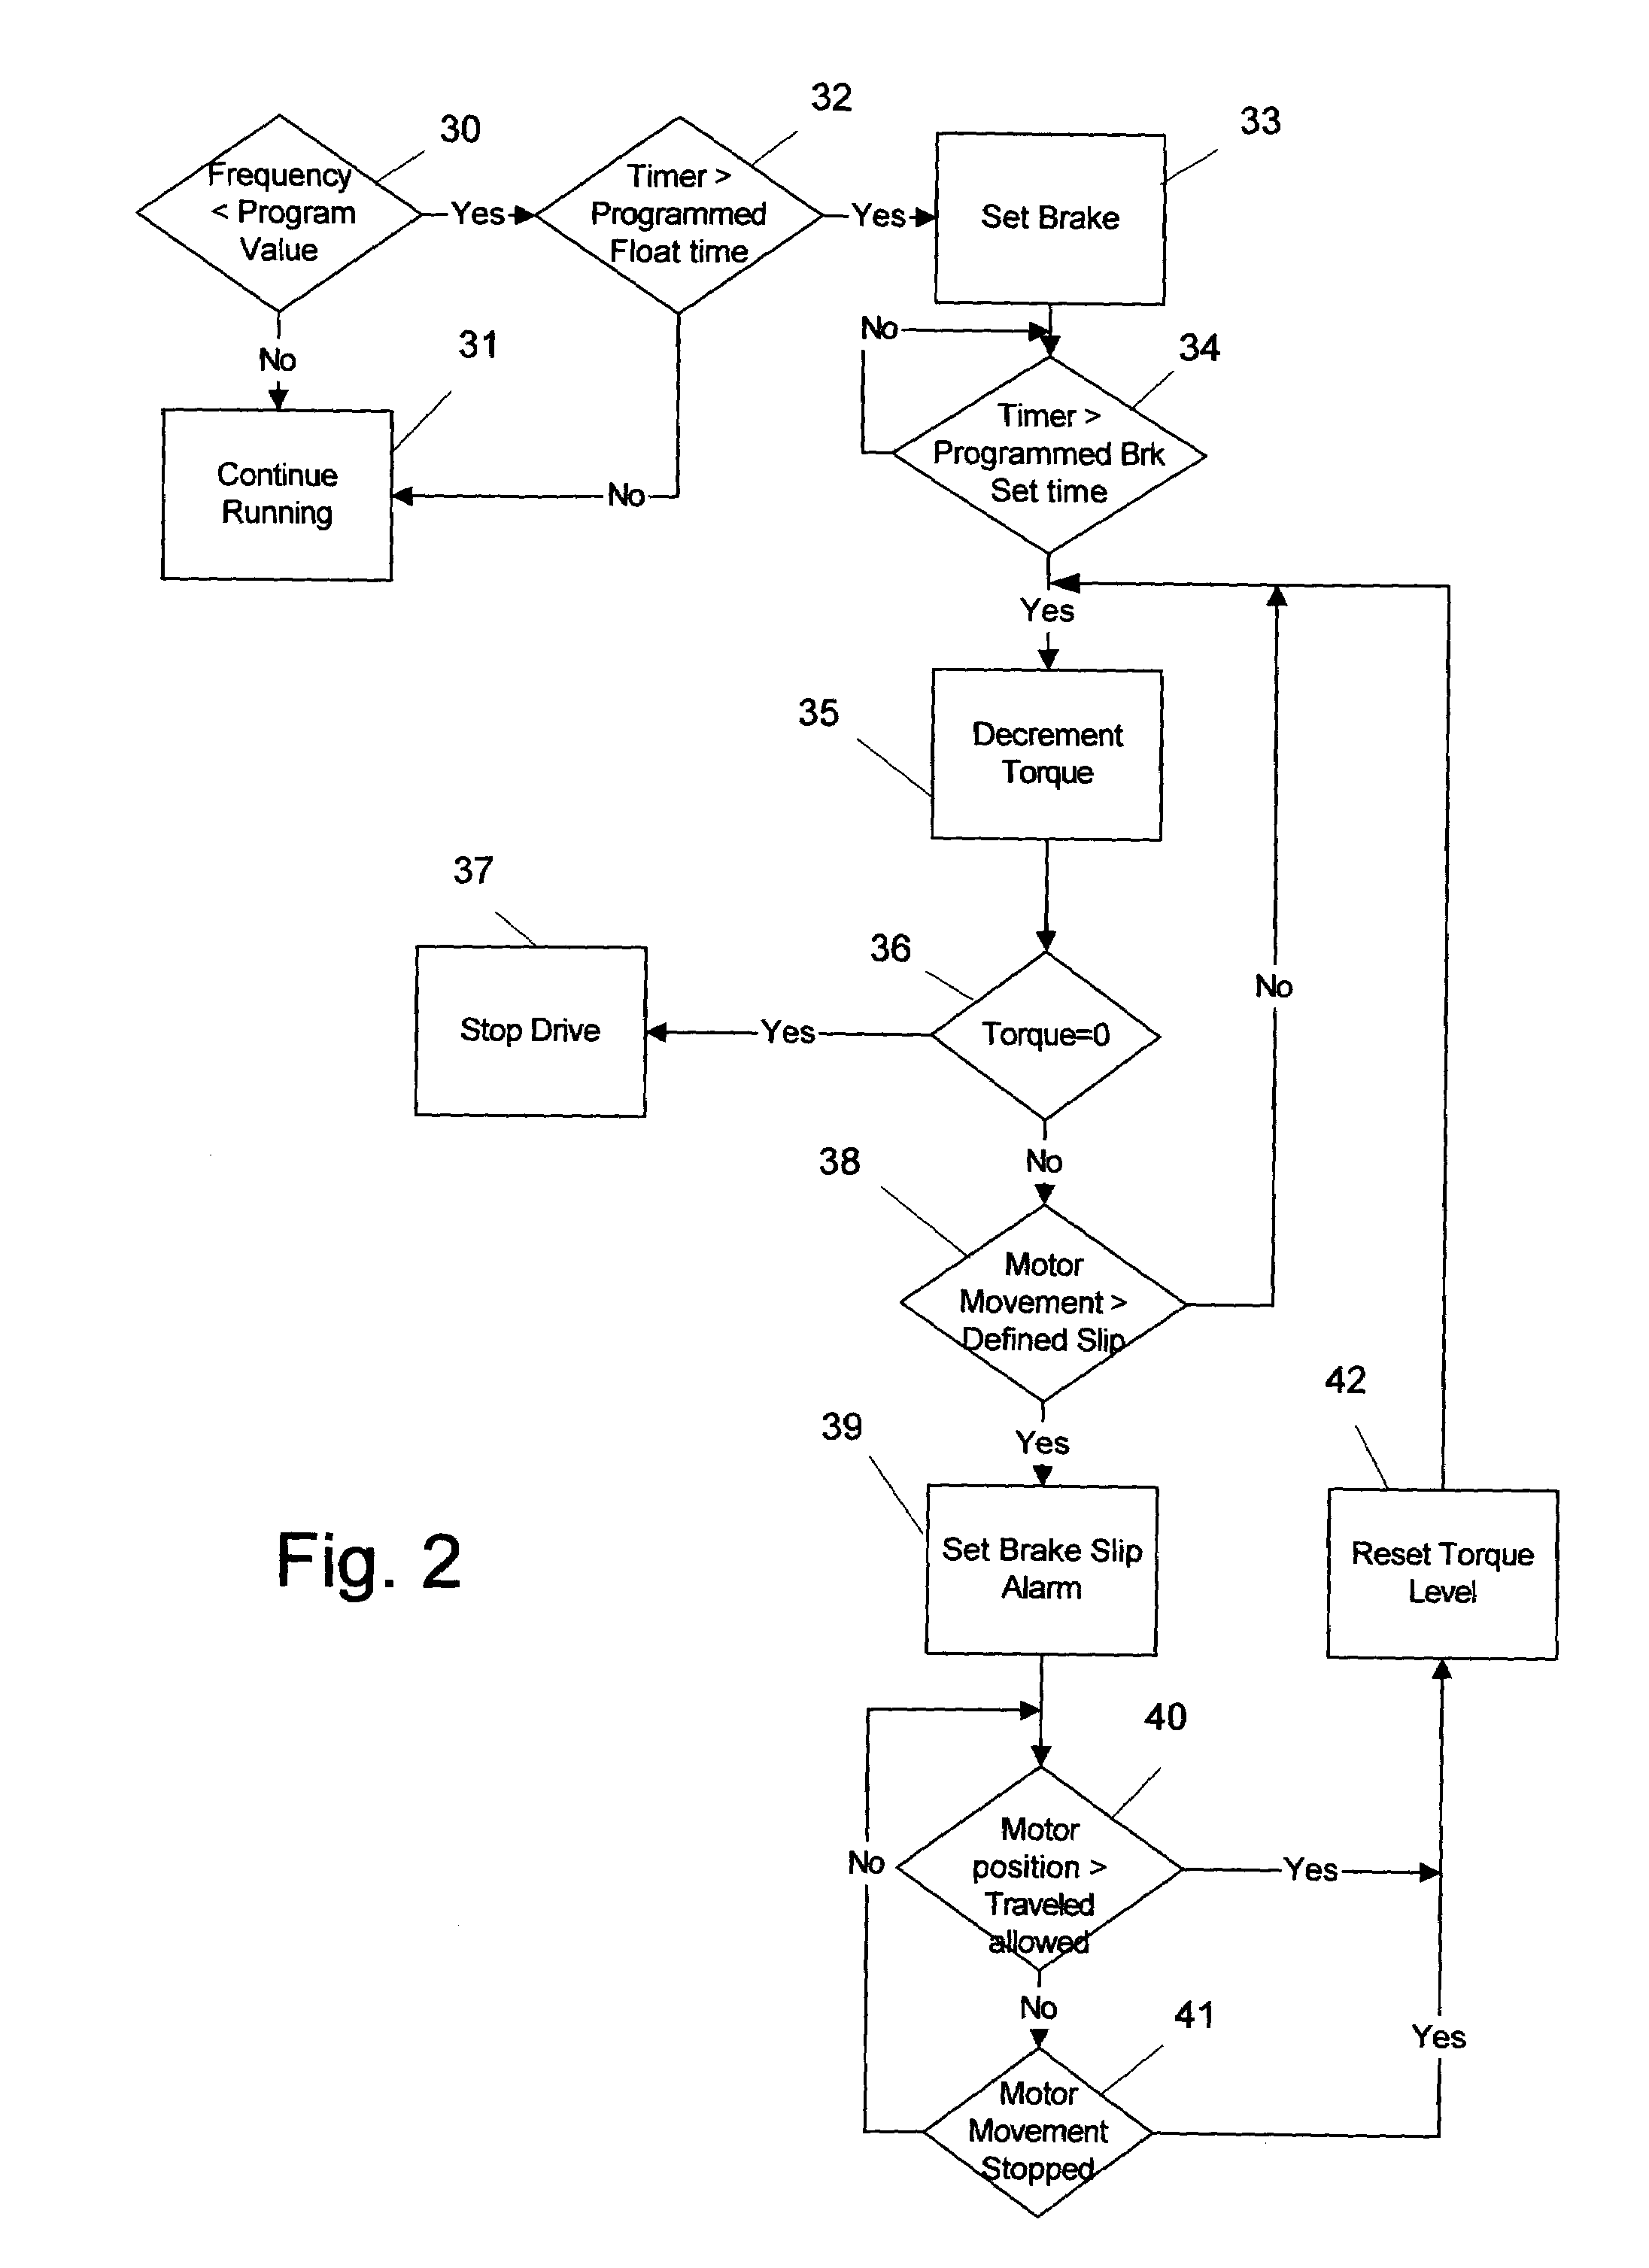 Motor control for stopping a load and detecting mechanical brake slippage